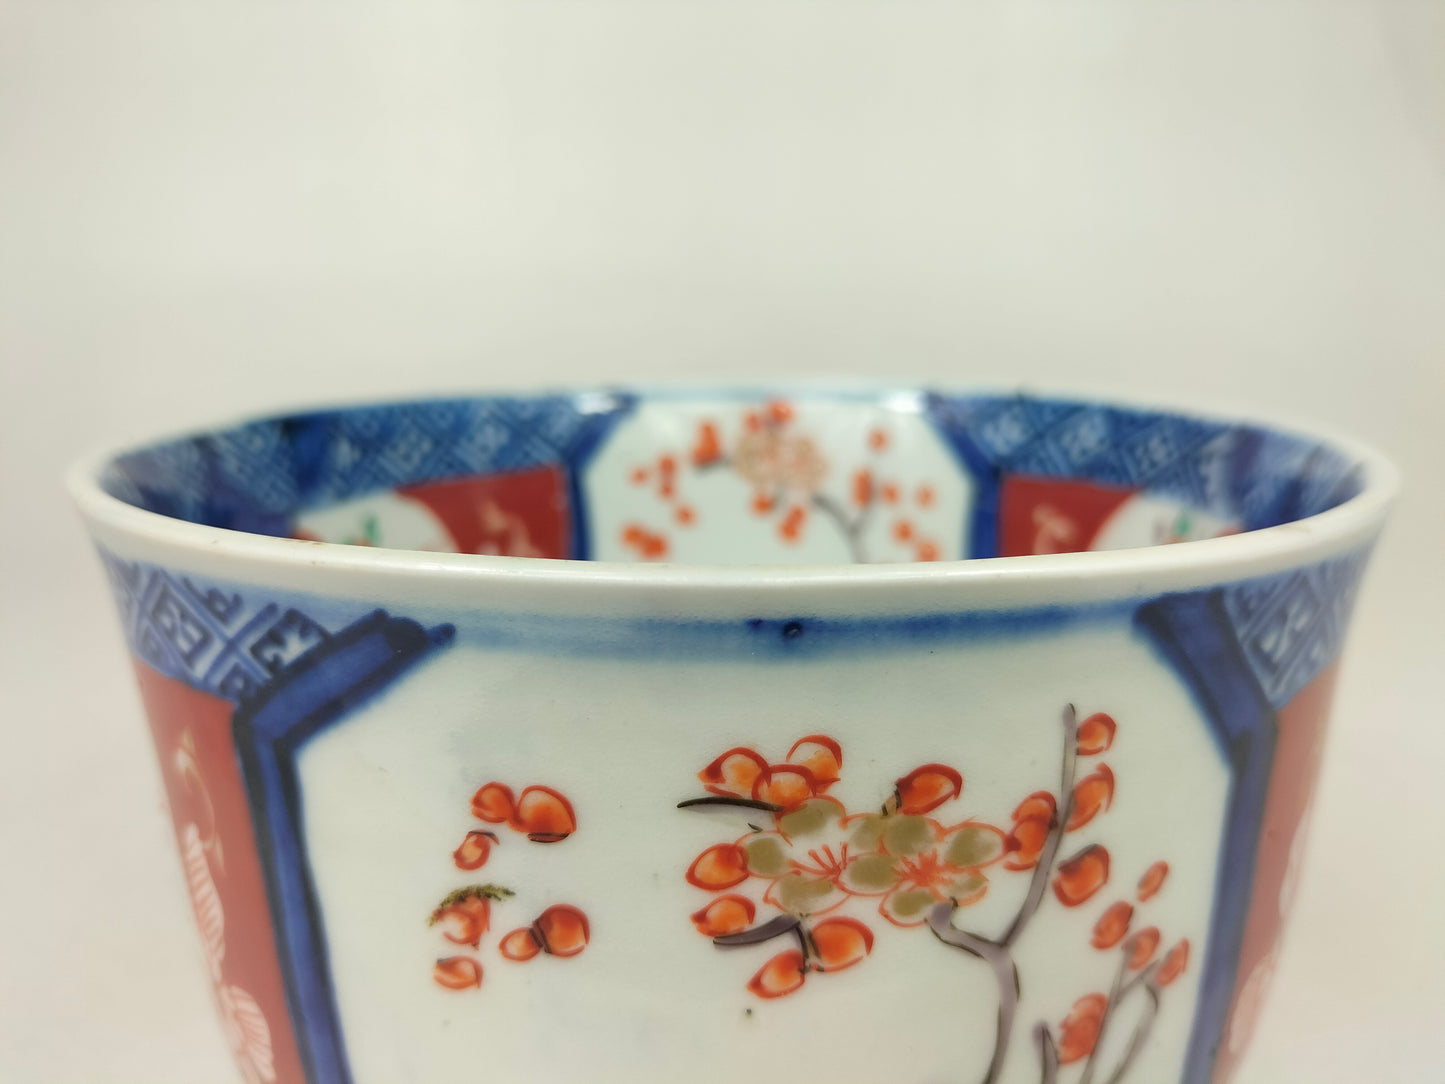 Antique Japanese imari bowl decorated with floral motifs // Meiji Period - 19th century